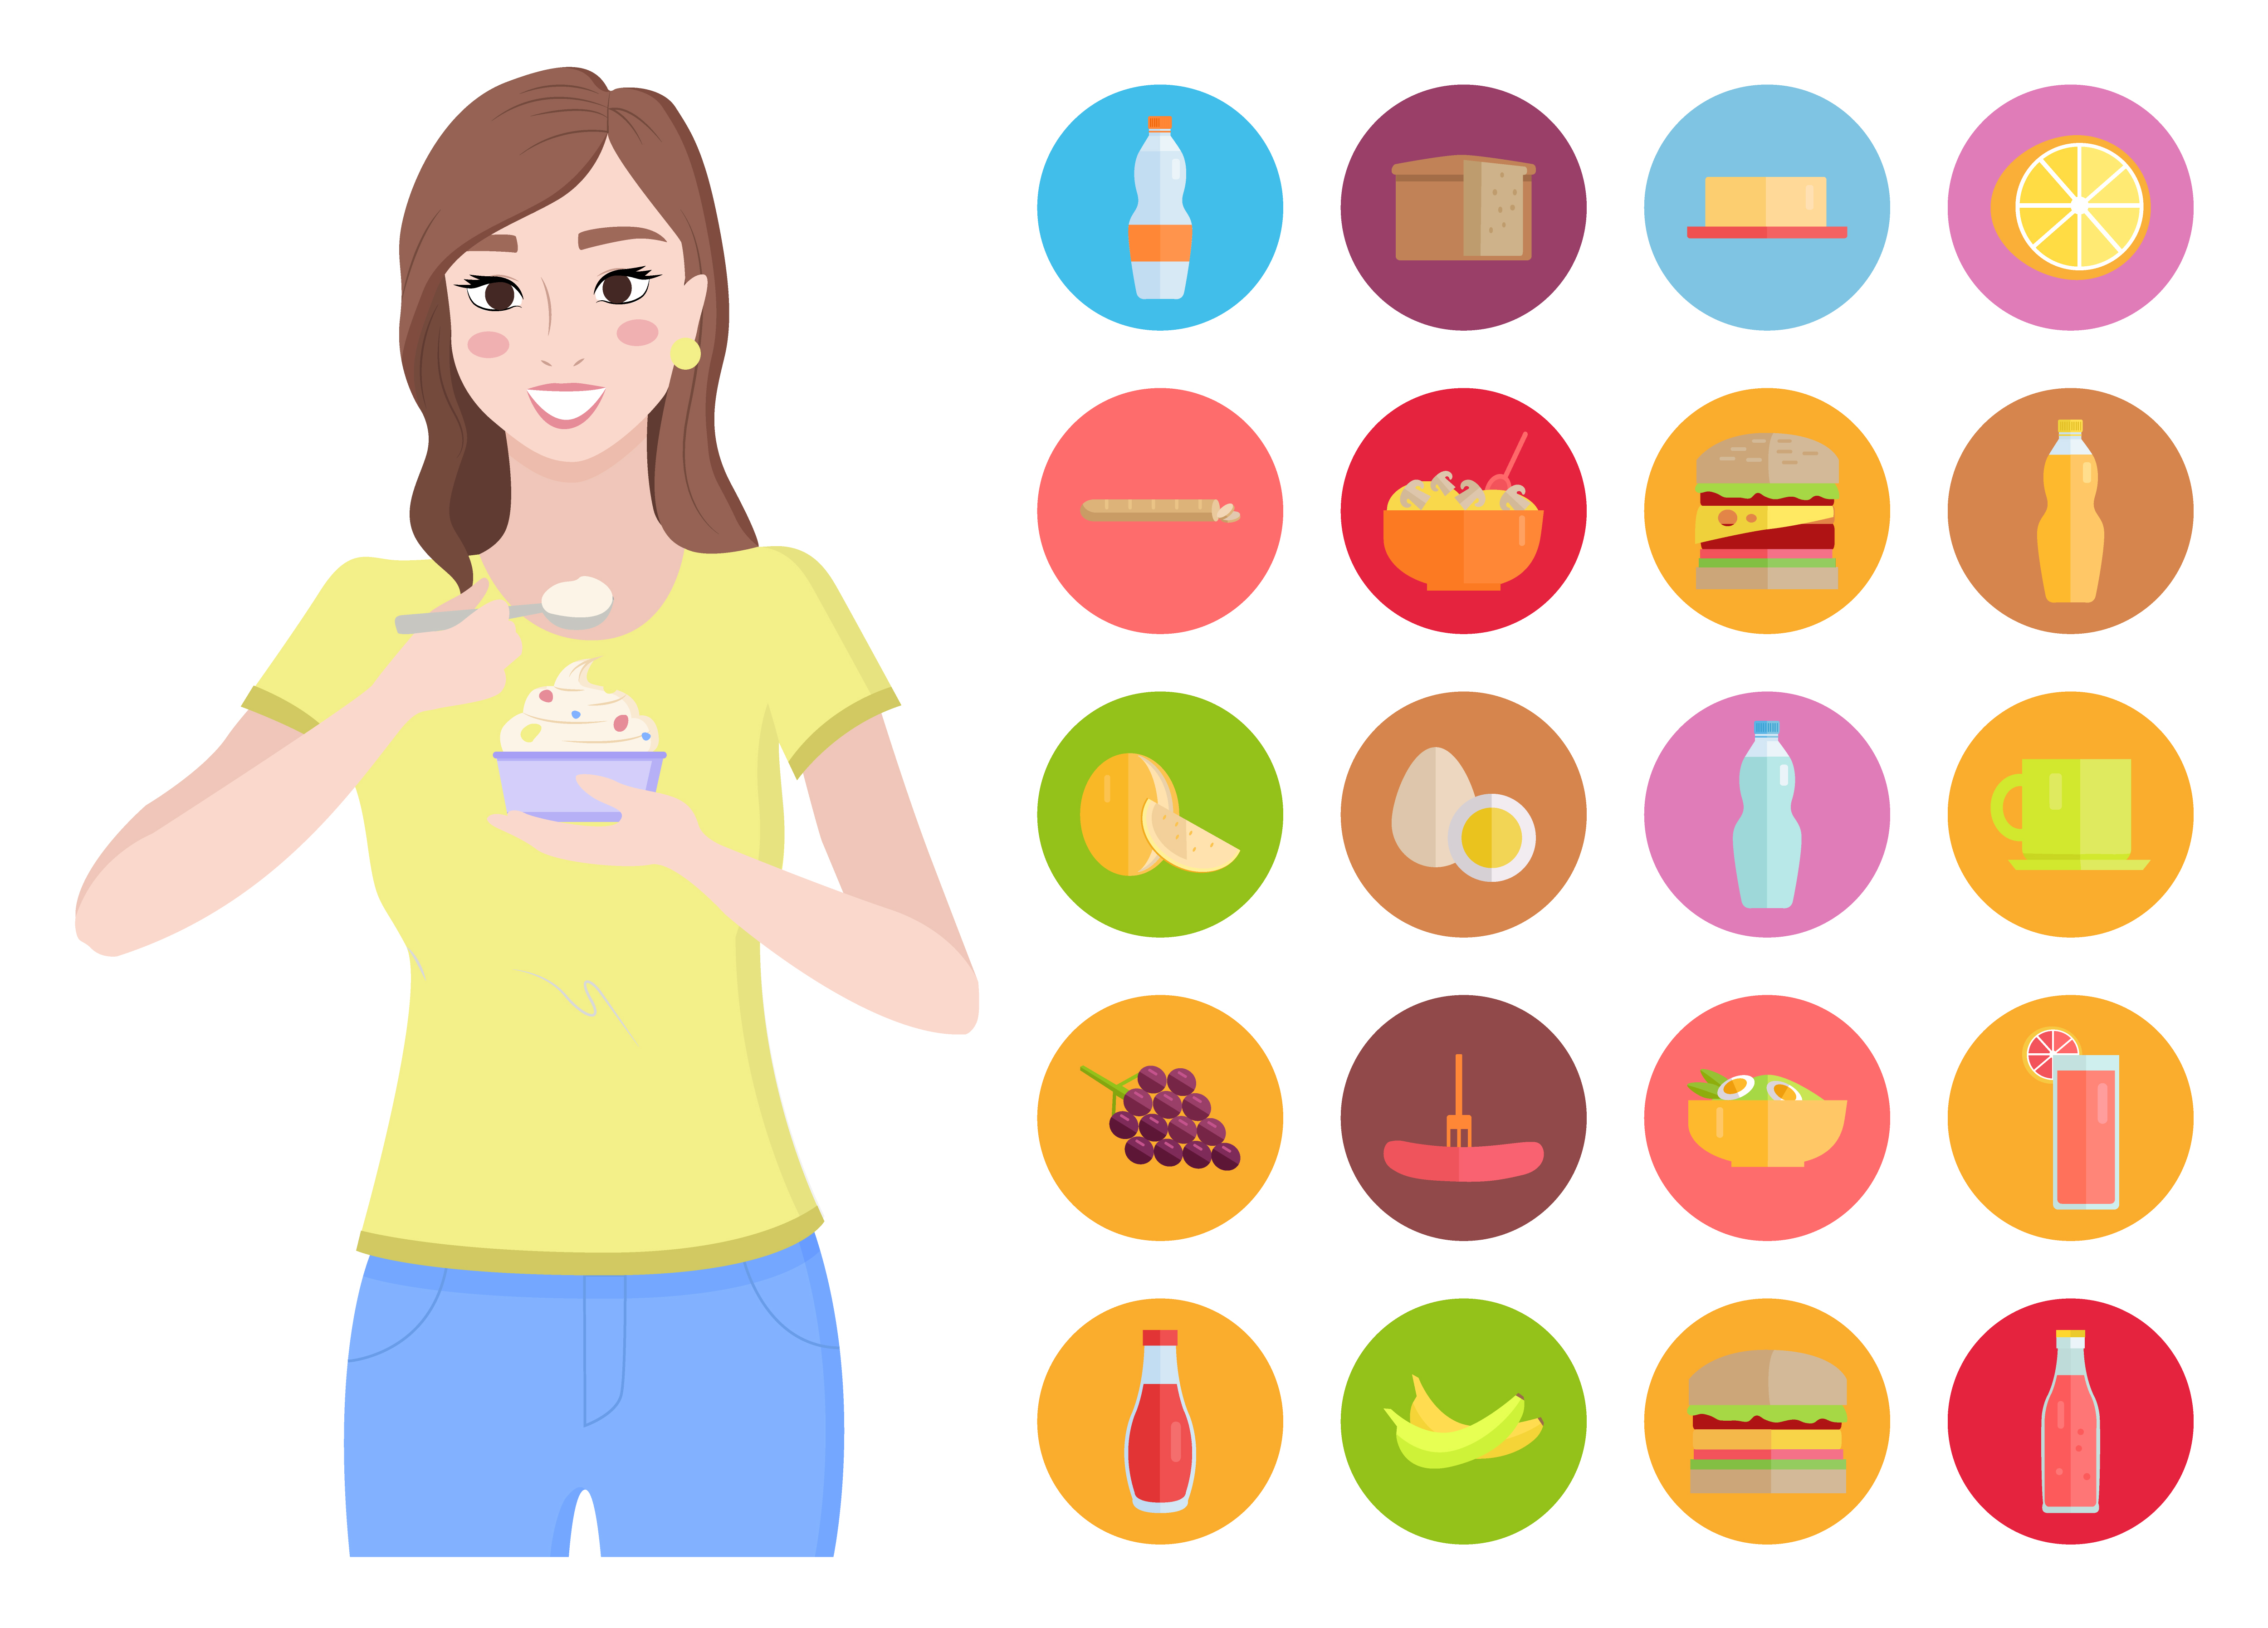 Pretty woman hold cupcake in hands and eat it. Icons with healthy and tasty food with probiotics and natural products. Diet organic meals, fruits and vegetables. Vector illustration in flat style. Woman Eat Cake, Healthy Food, Fruit and Vegetable